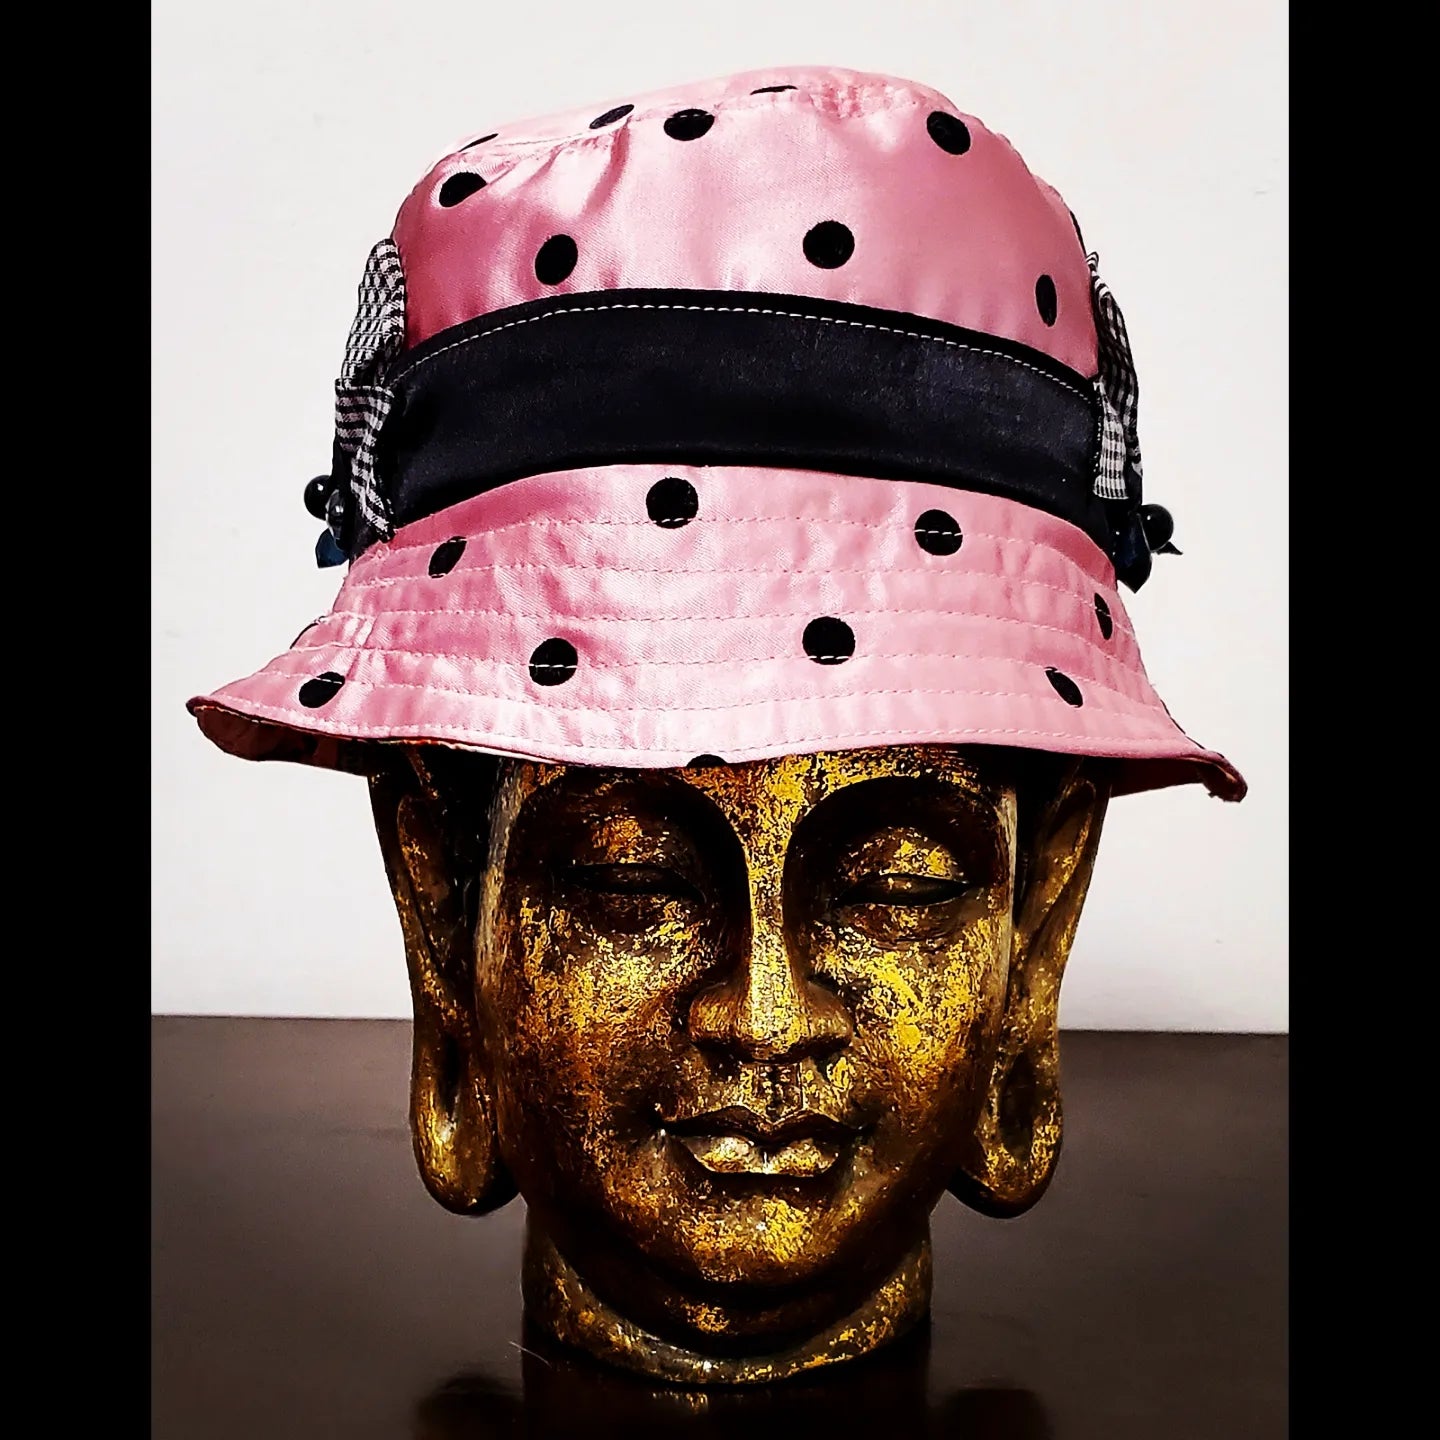 DITTO-Pink satin bucket hat with black flocked polka dots